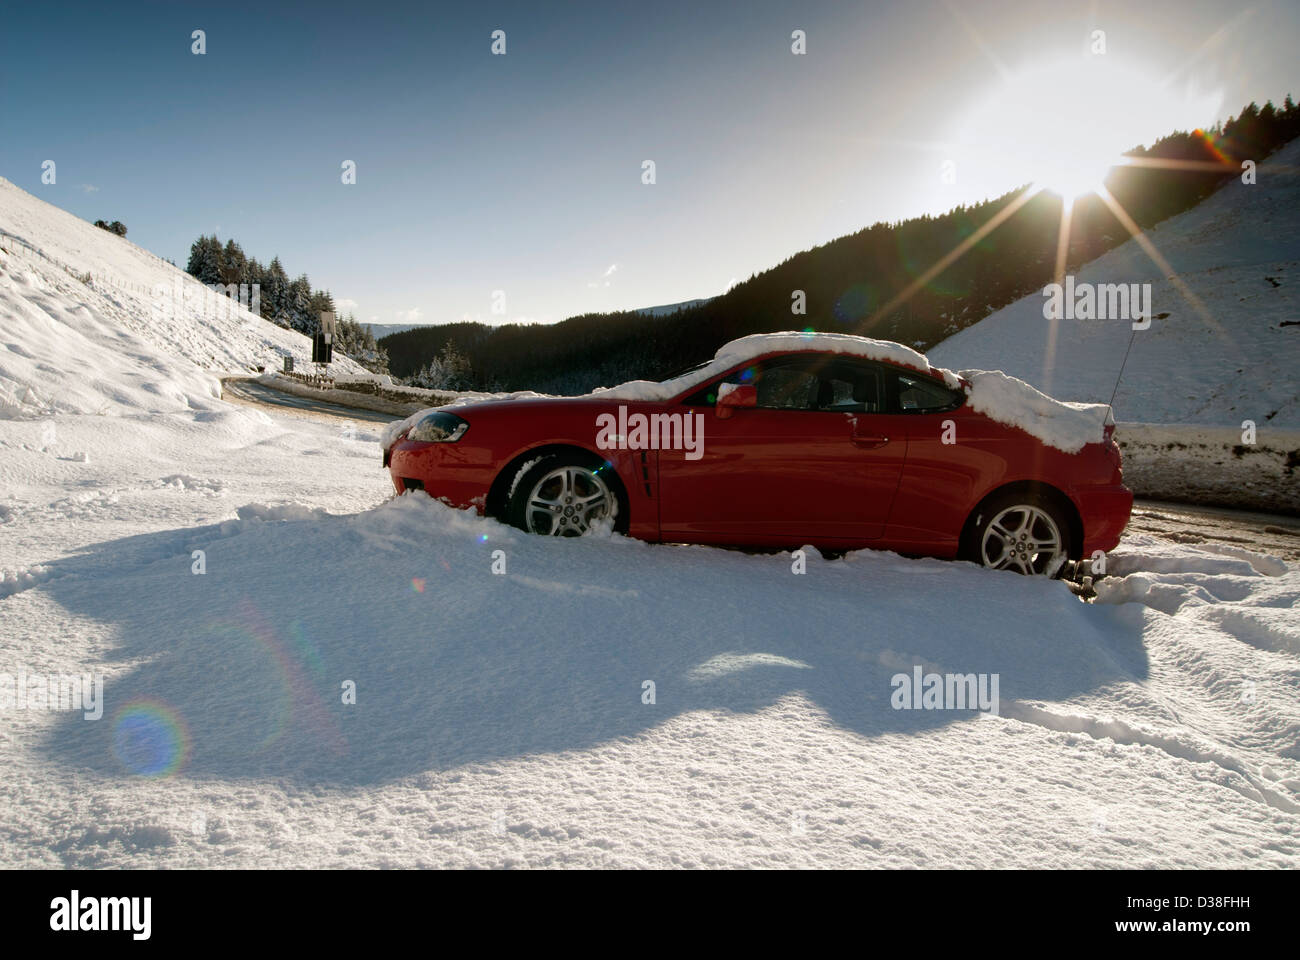 Car abandoned in snow, bad weather, heavy snowfall, red, white, blue, shadow, sun, isolated, Stock Photo